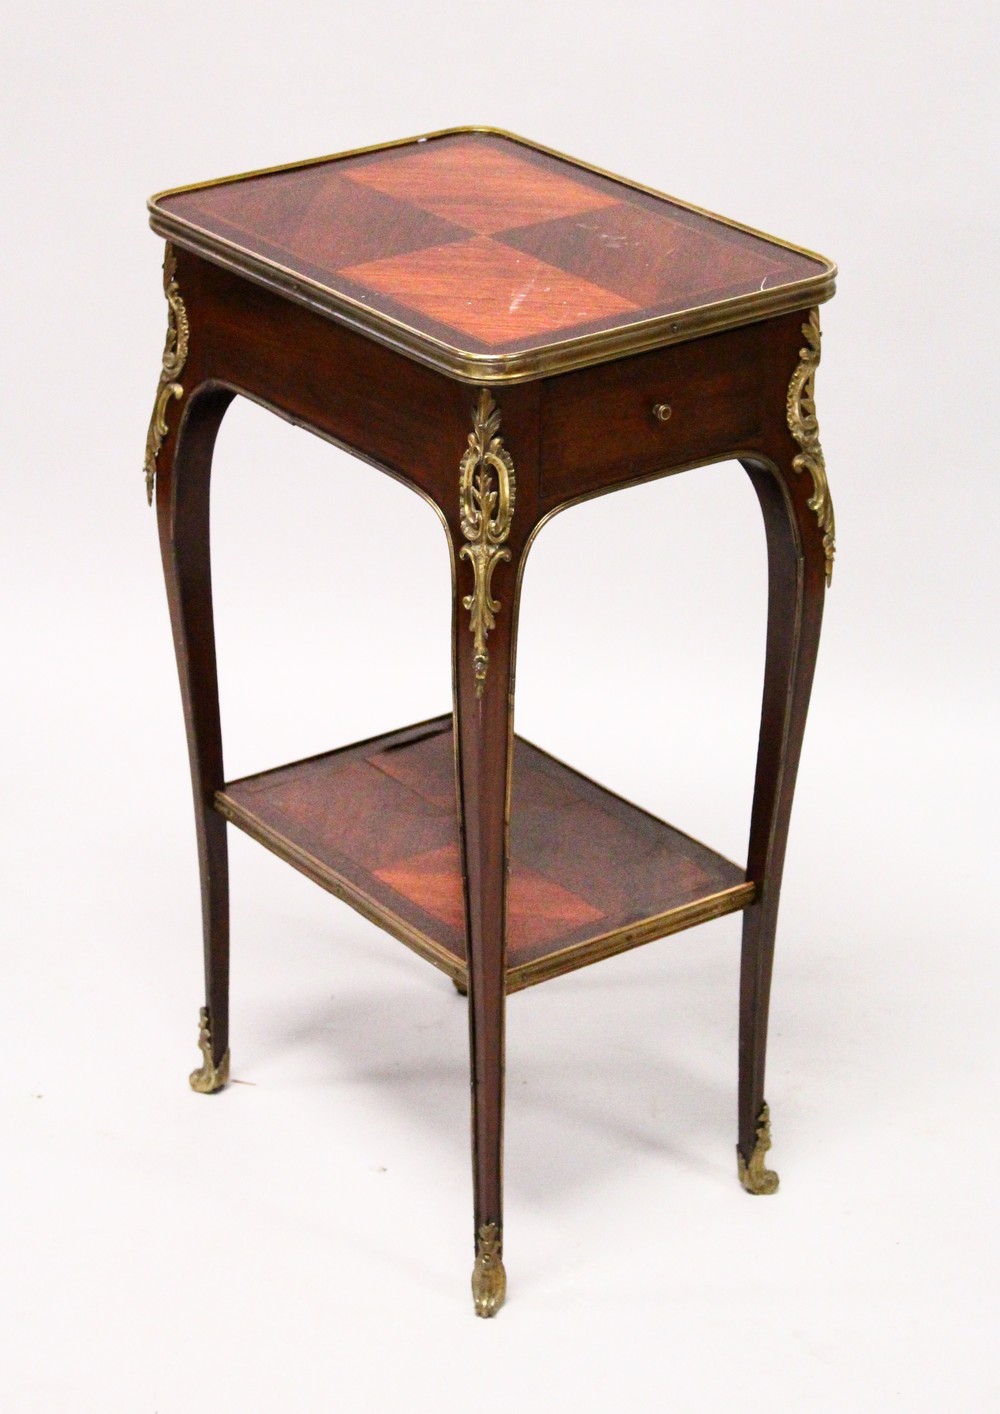 A SMALL LATE 19TH CENTURY FRENCH MAHOGANY AND ORMOLU TABLE, with a drawer to one end, on slender